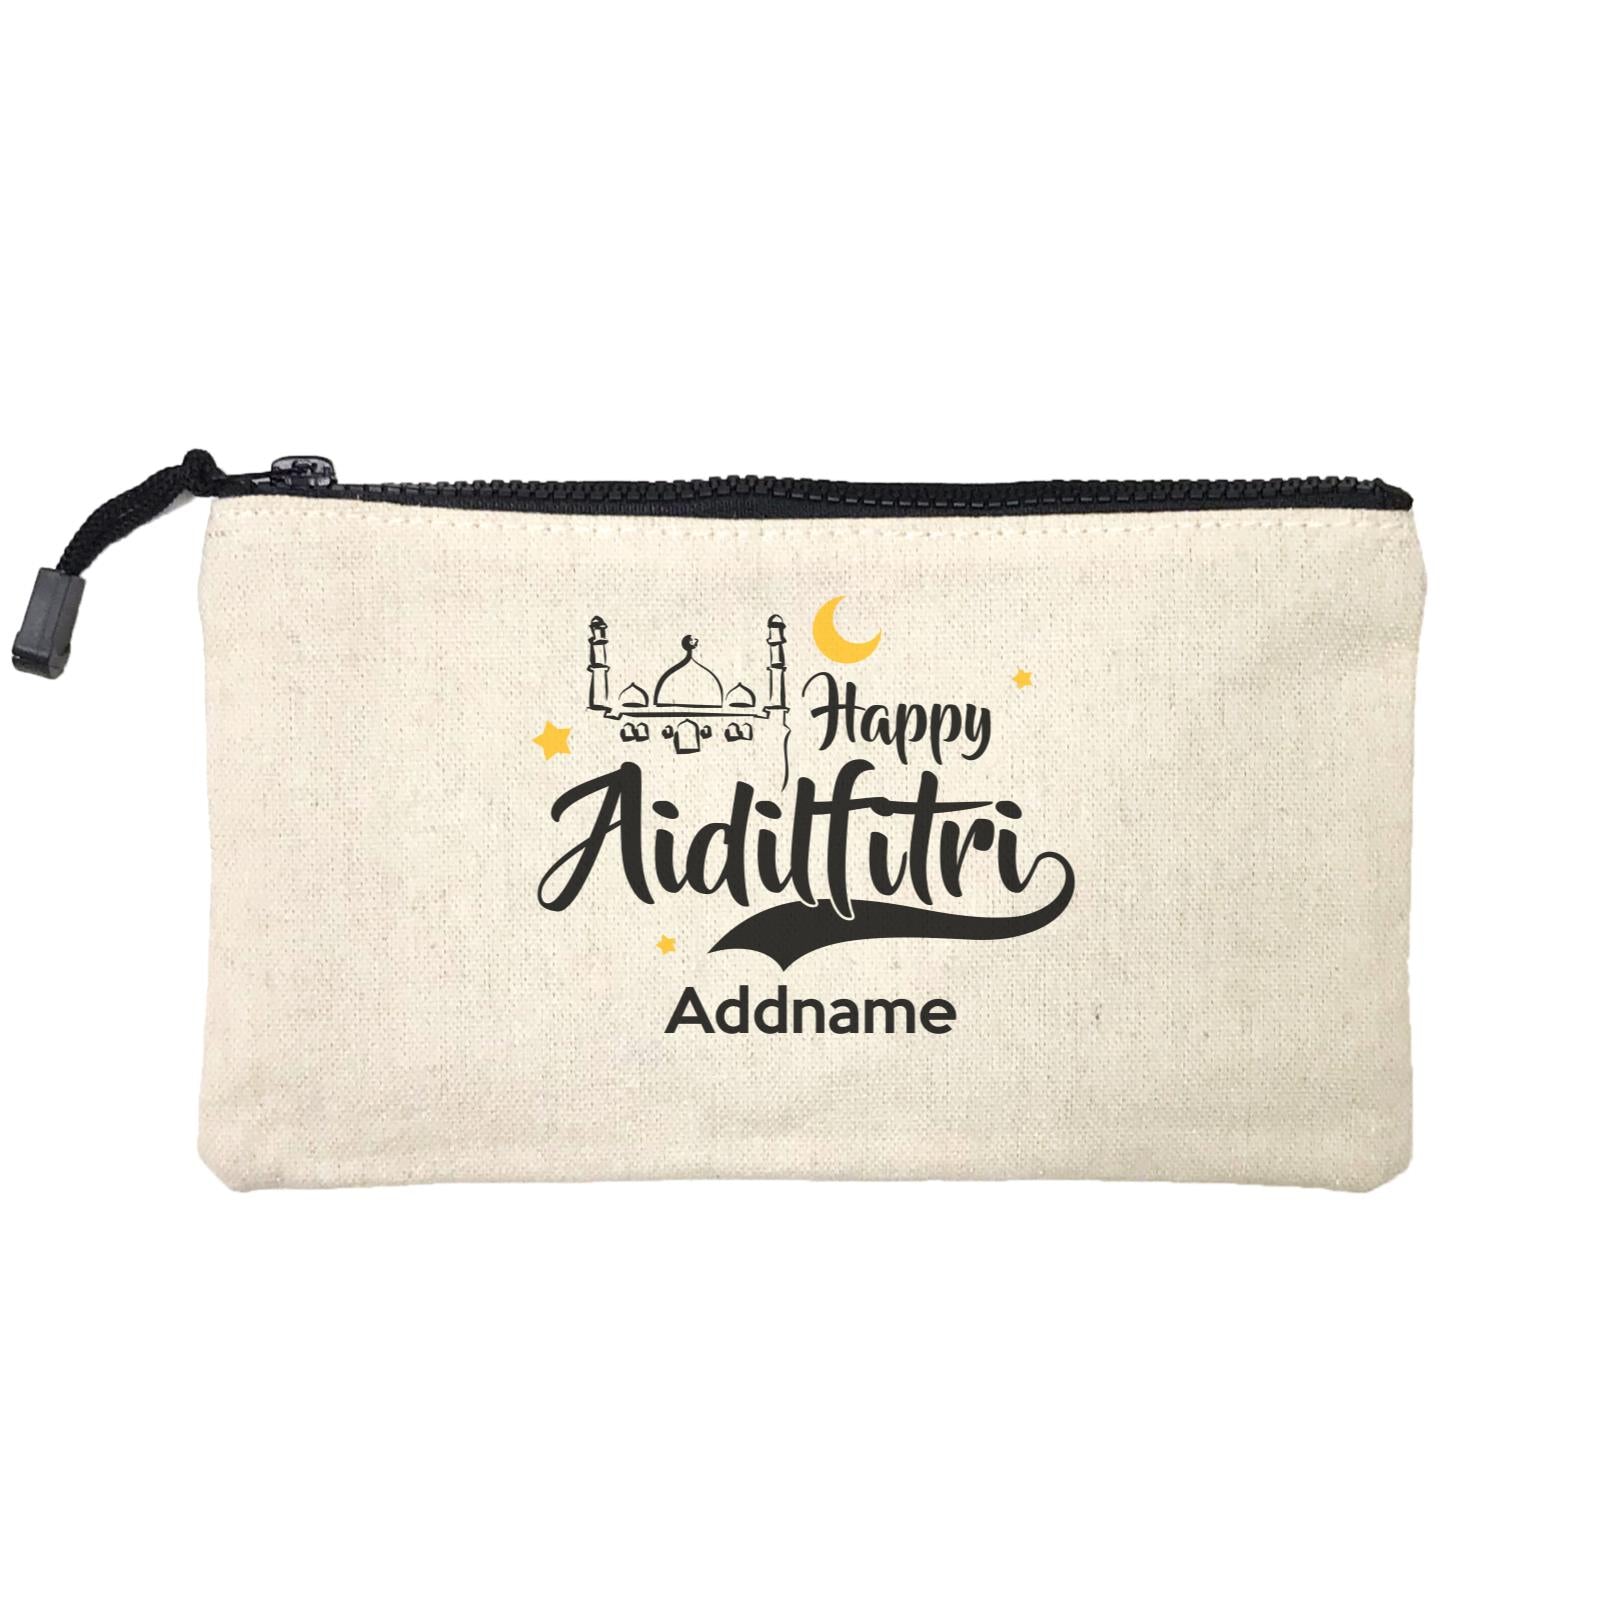 Raya Typography Doodle Mosque Happy Aidilfitri Addname Mini Accessories Stationery Pouch